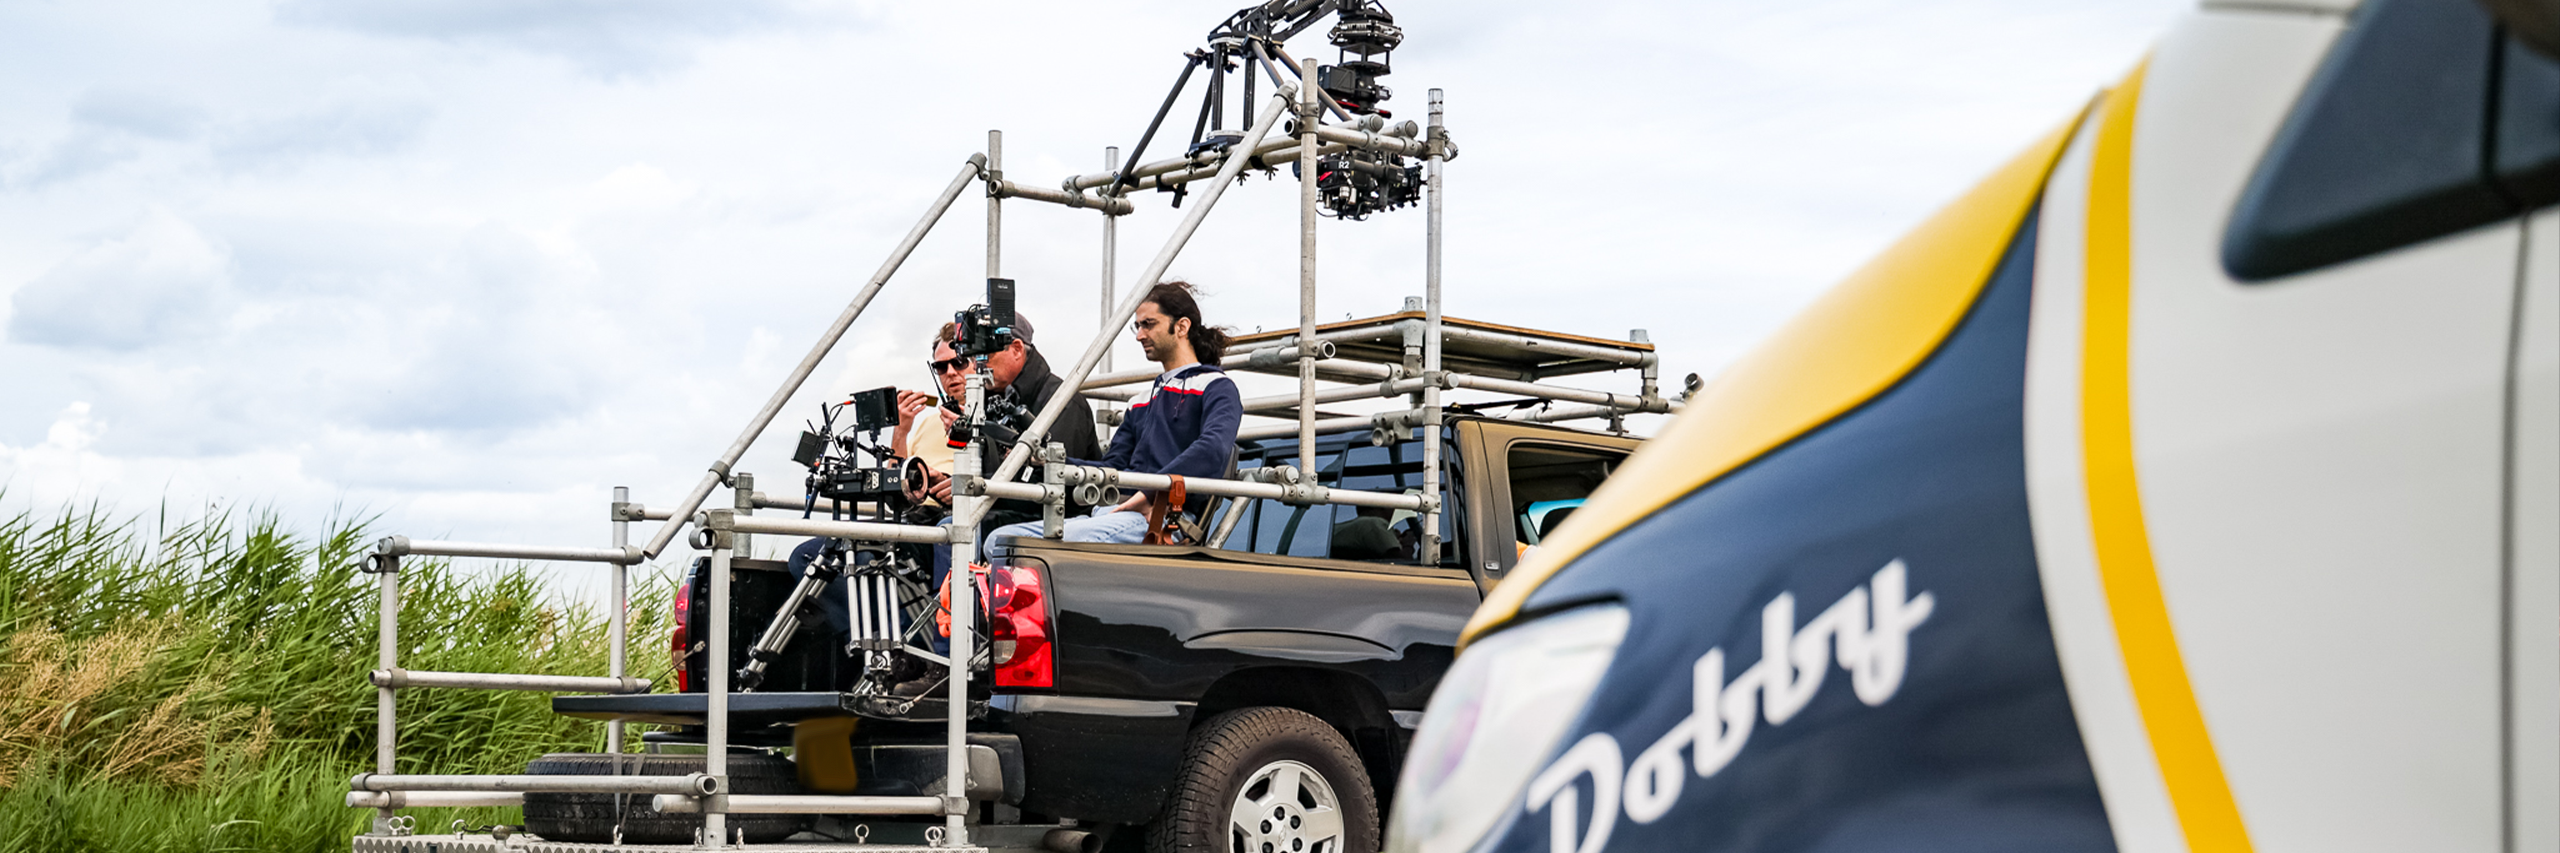 TV Film Production Crew Sitting on the Back of a Camera Car